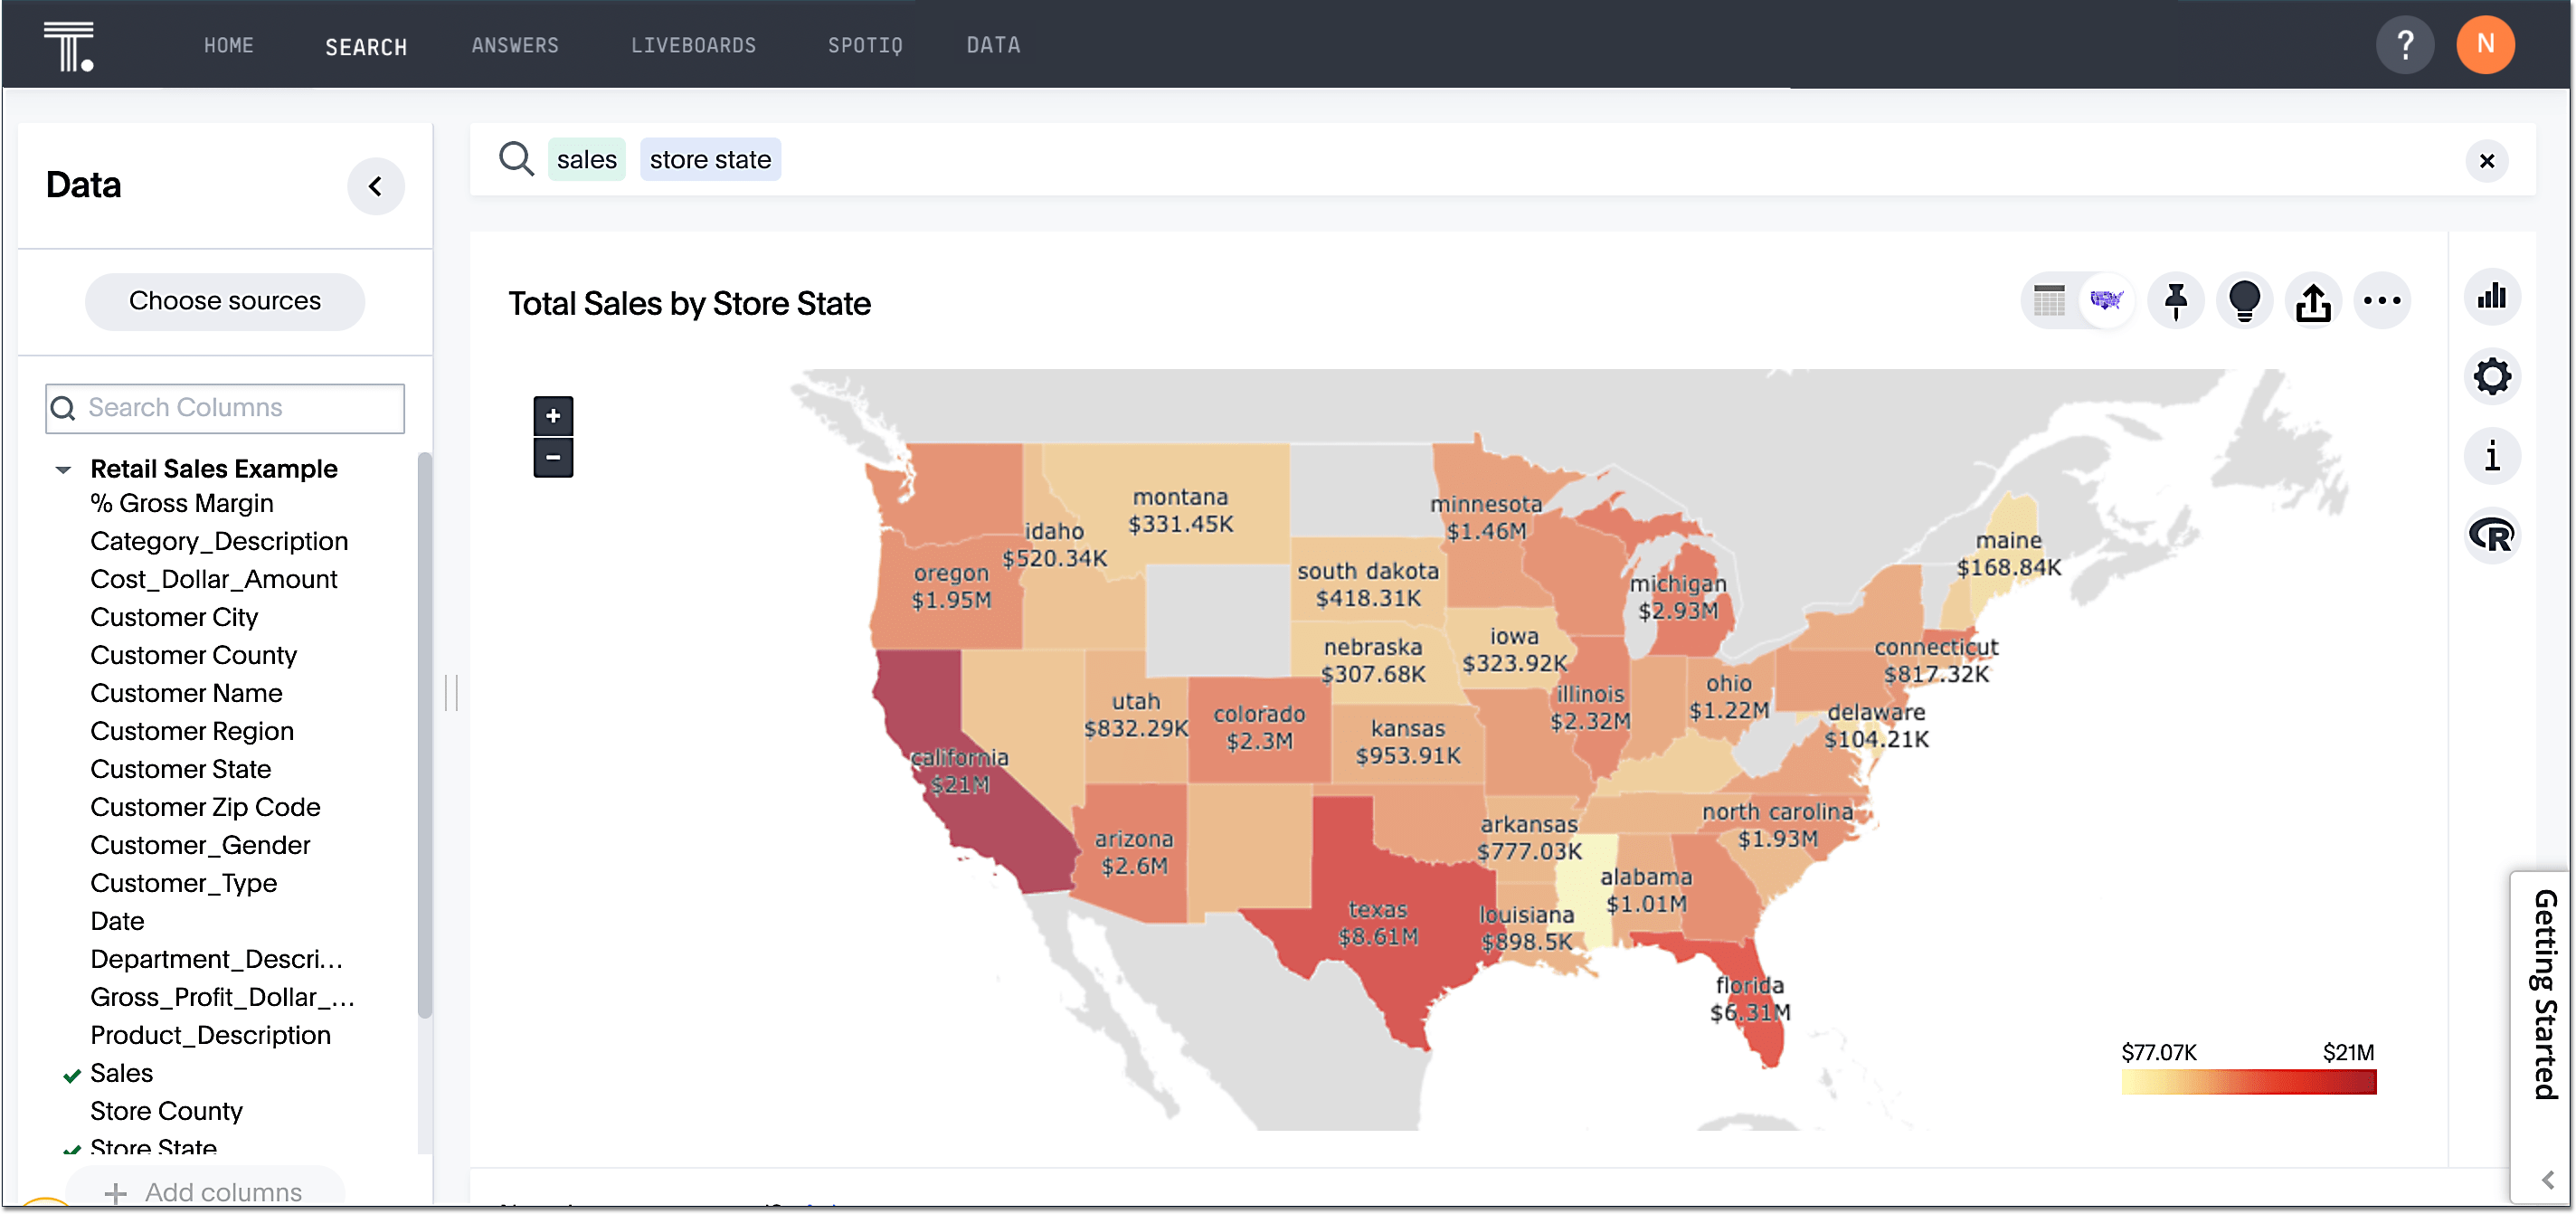 Geo search with state names and sales labels